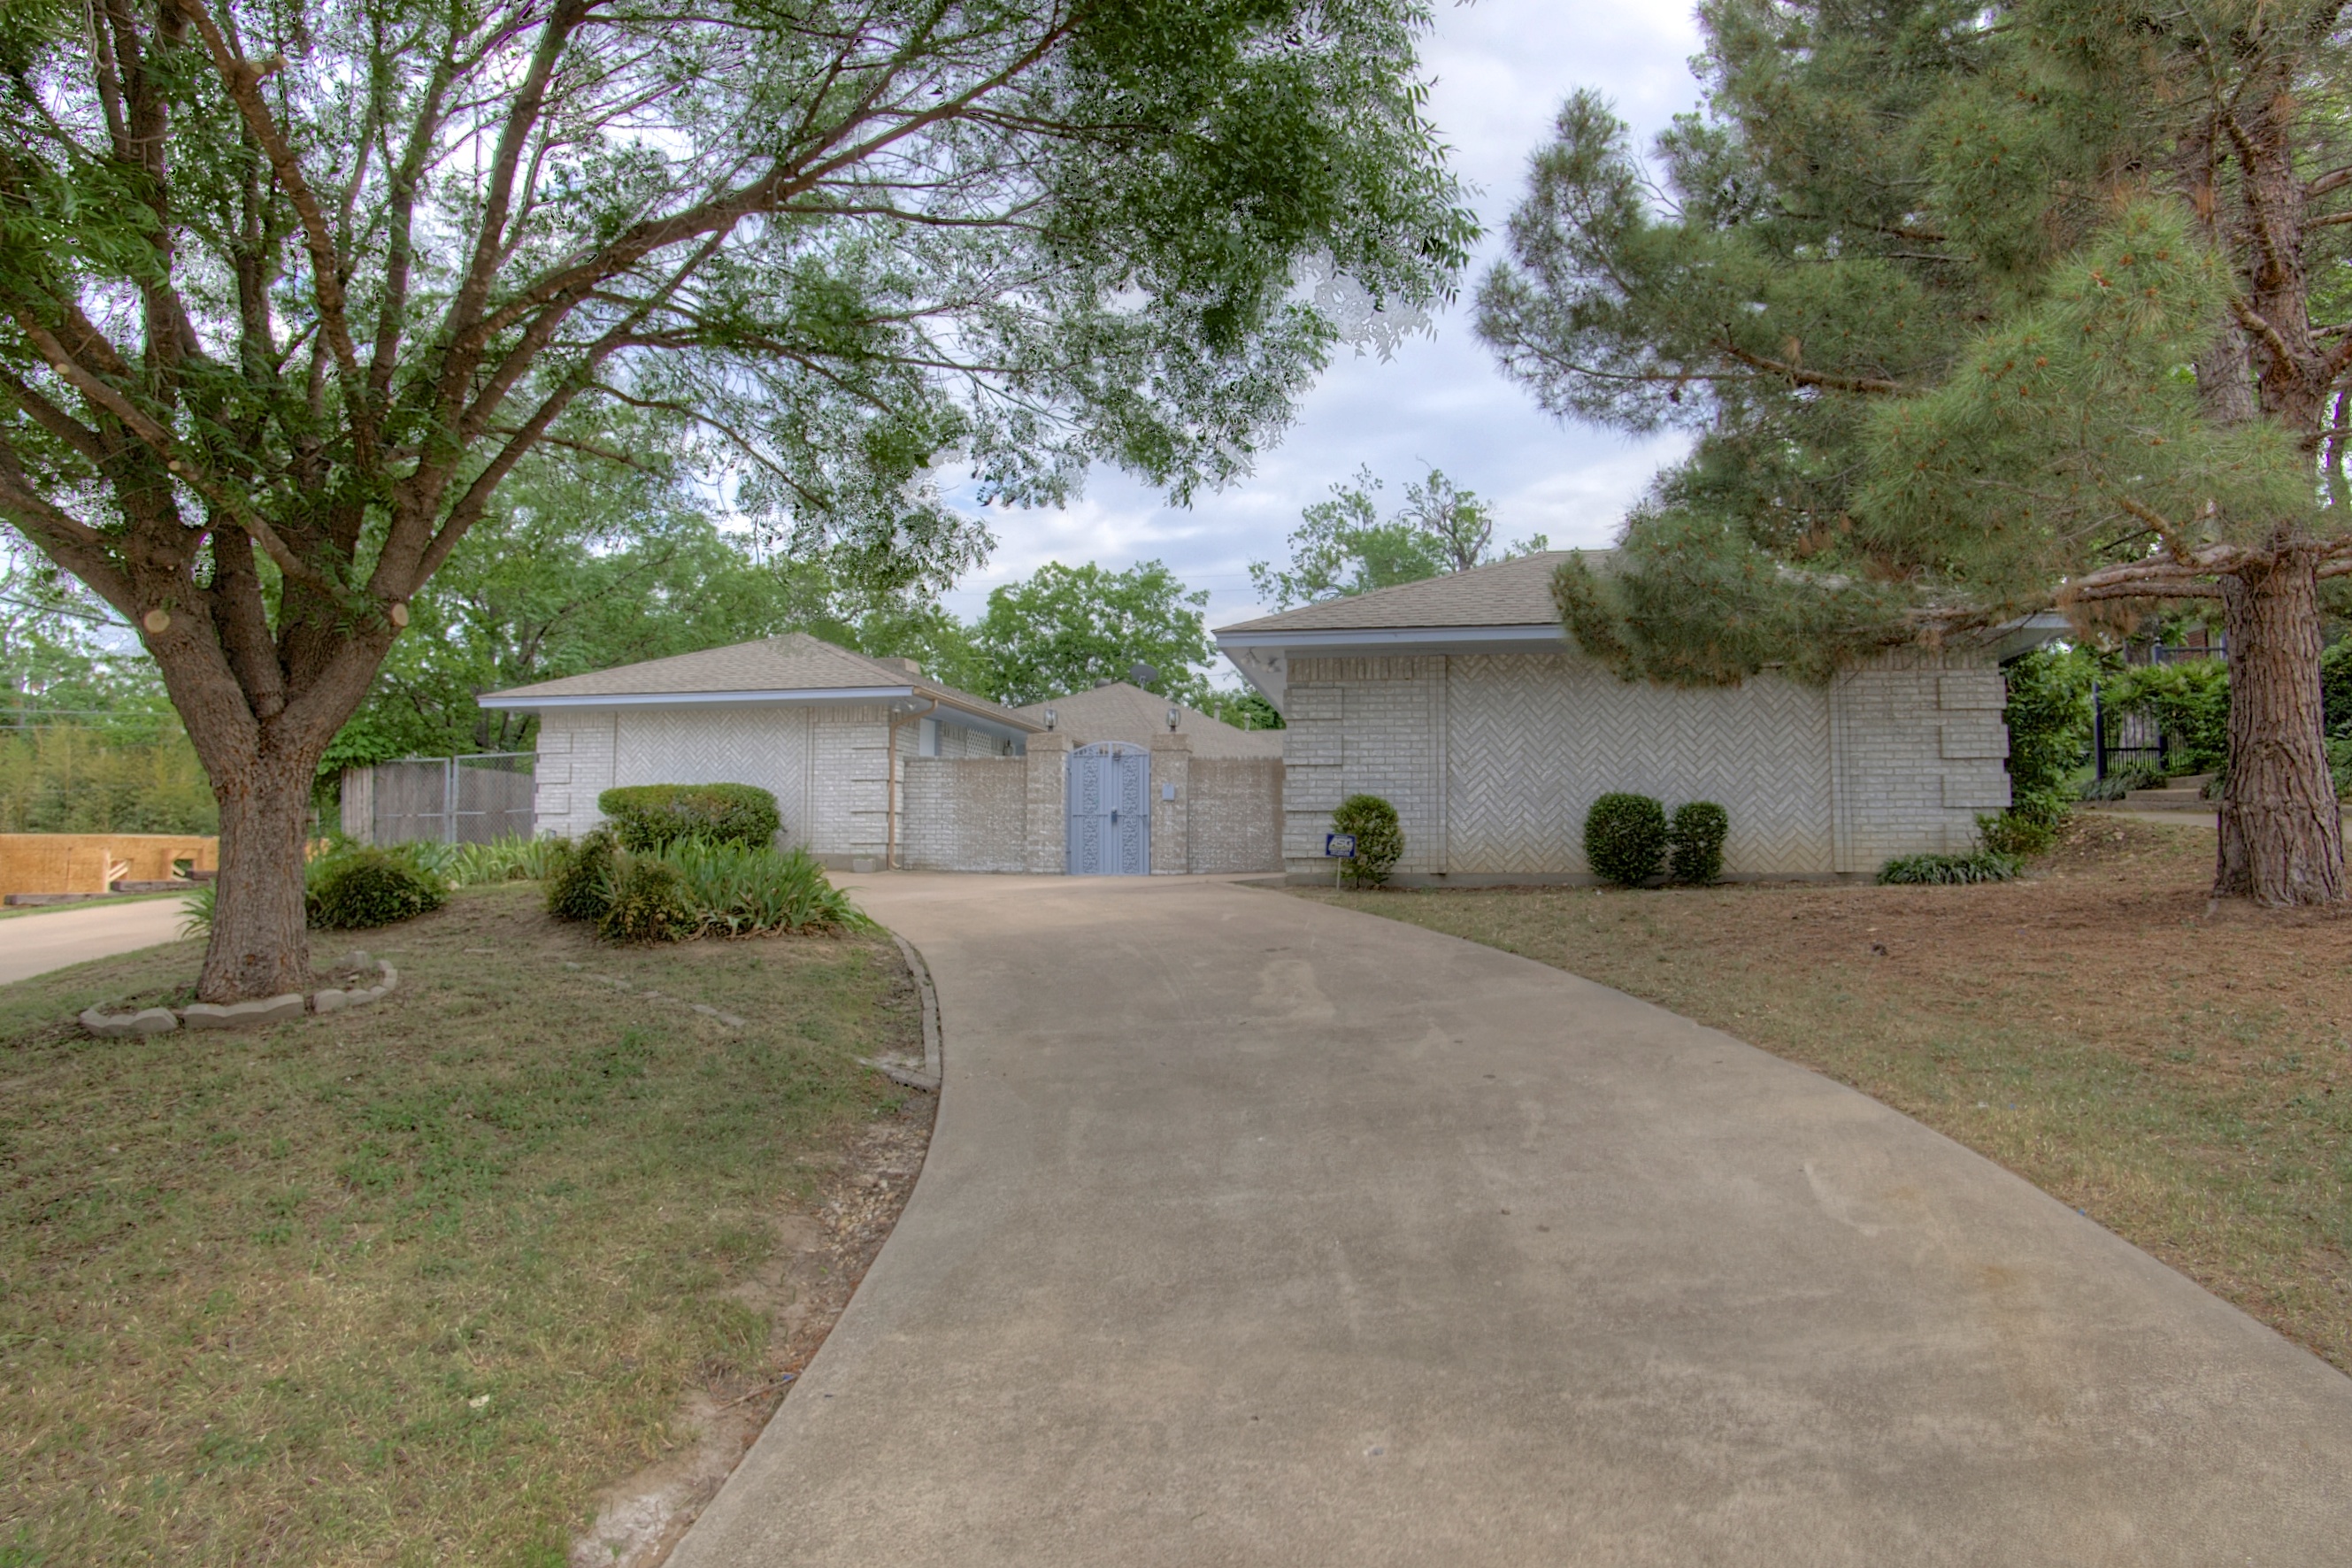 Featured image for “Fort Worth Mistletoe Heights Home For Sale – 76110”